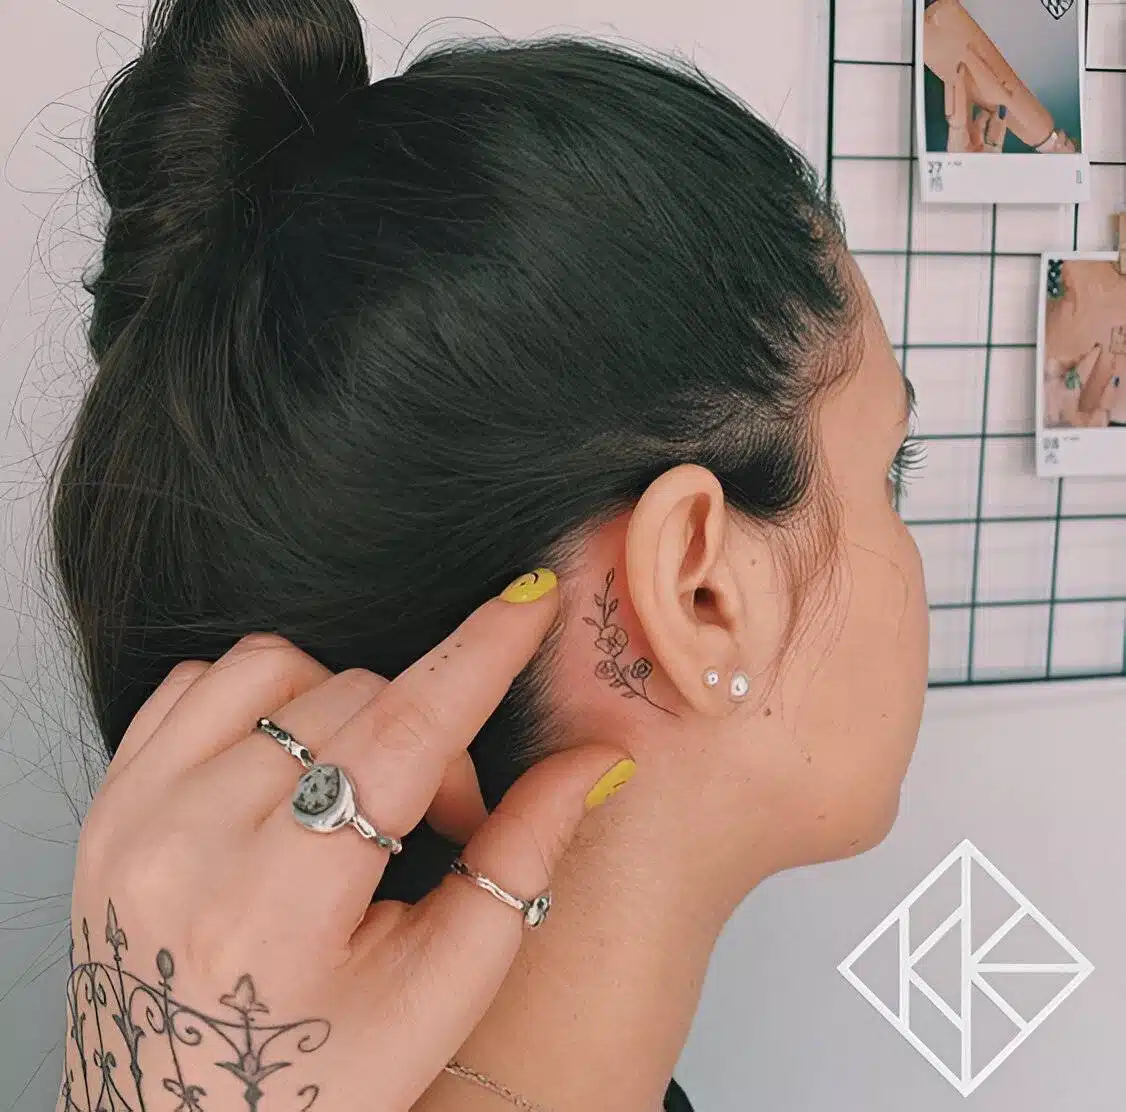 25 Low-key Stunning Behind The Ear Tattoos To Get ASAP - 183